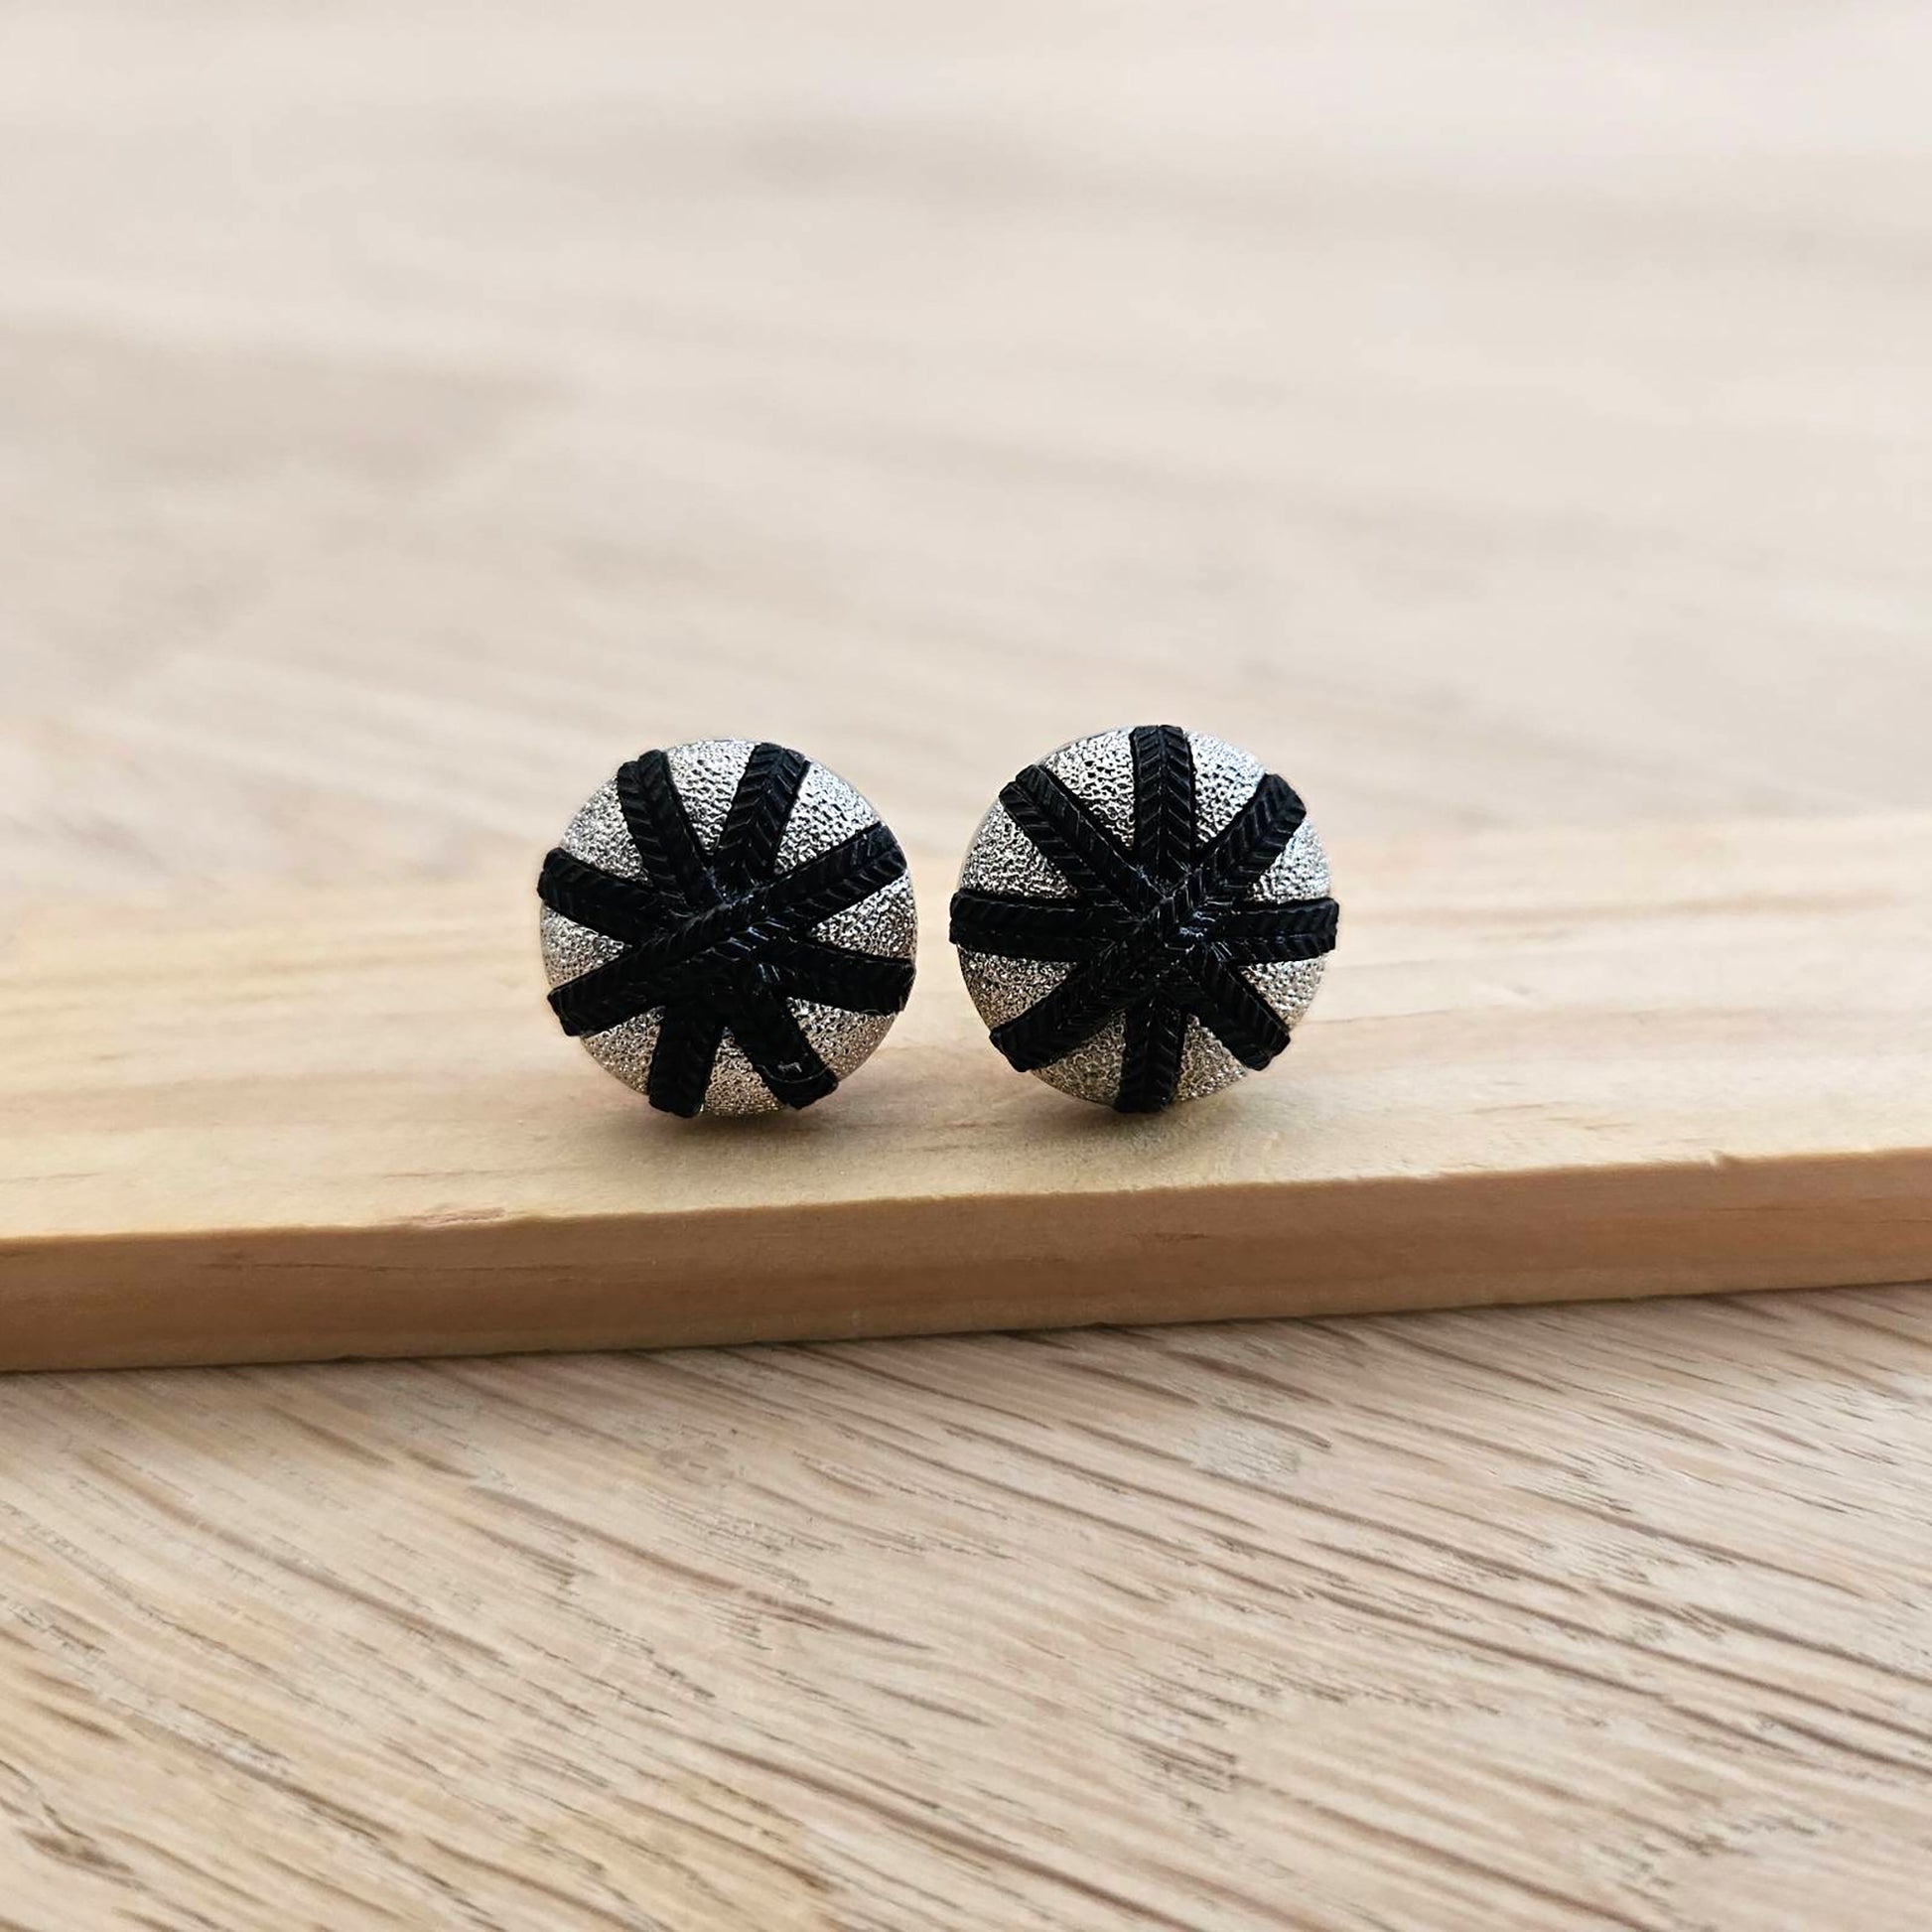 "star stud earrings - Sustainable Style: Upcycled Black and Silver Studs"